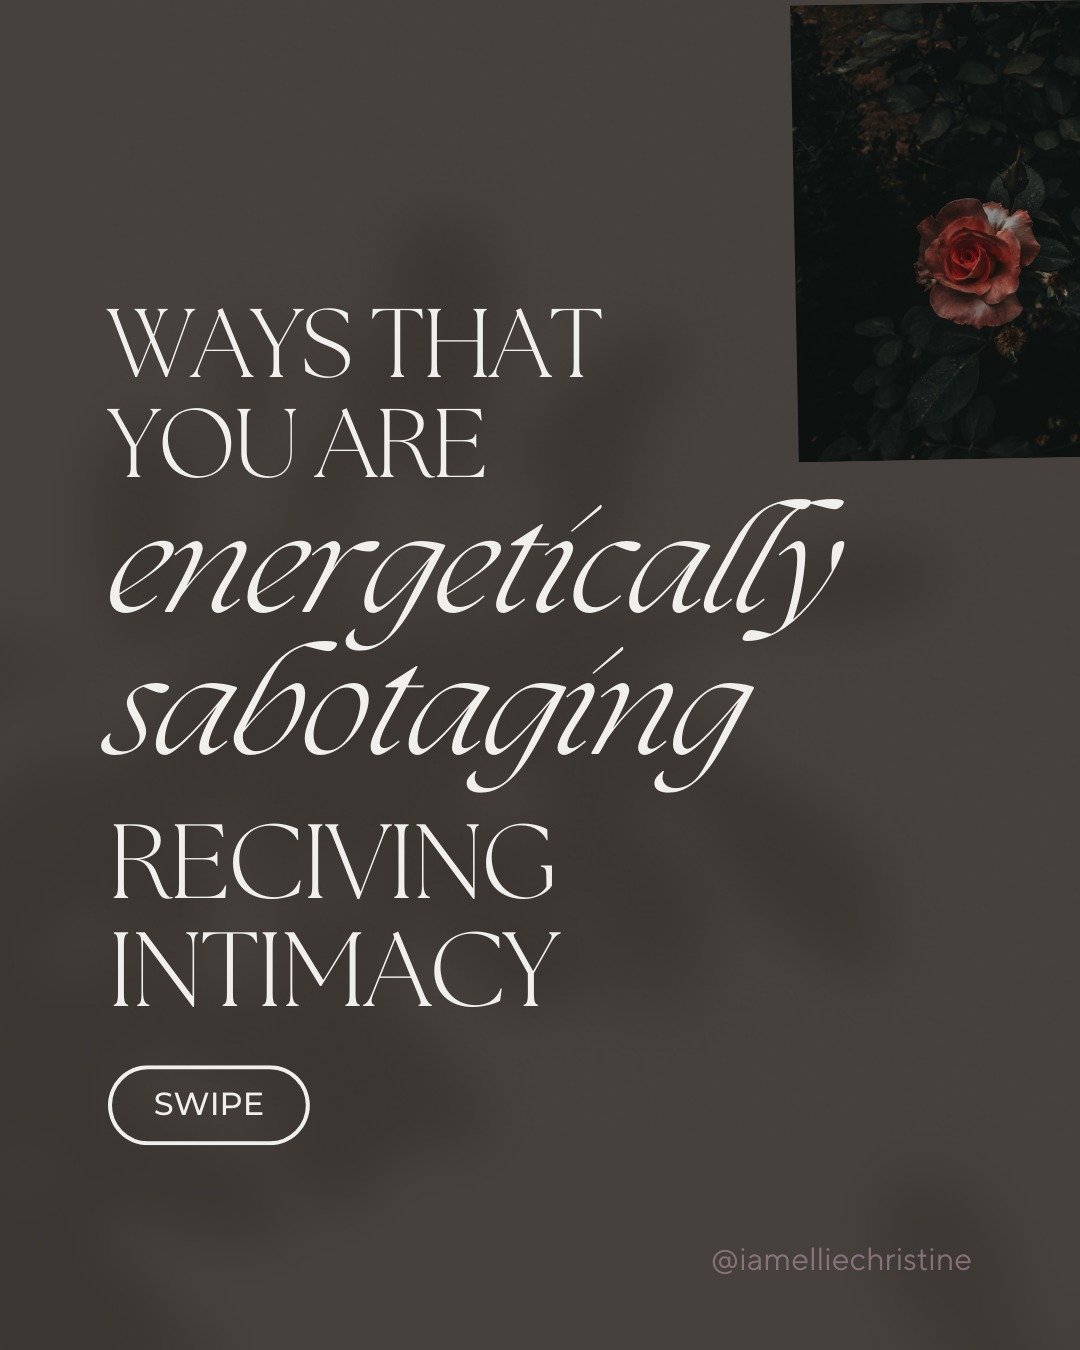 You're energetically blocking receiving more intimacy in your life. 

Between the to-do lists, laundry, and having your head down constantly, you signal to yourself [and those around you] that you aren't open to receiving. 

And intimacy is all about